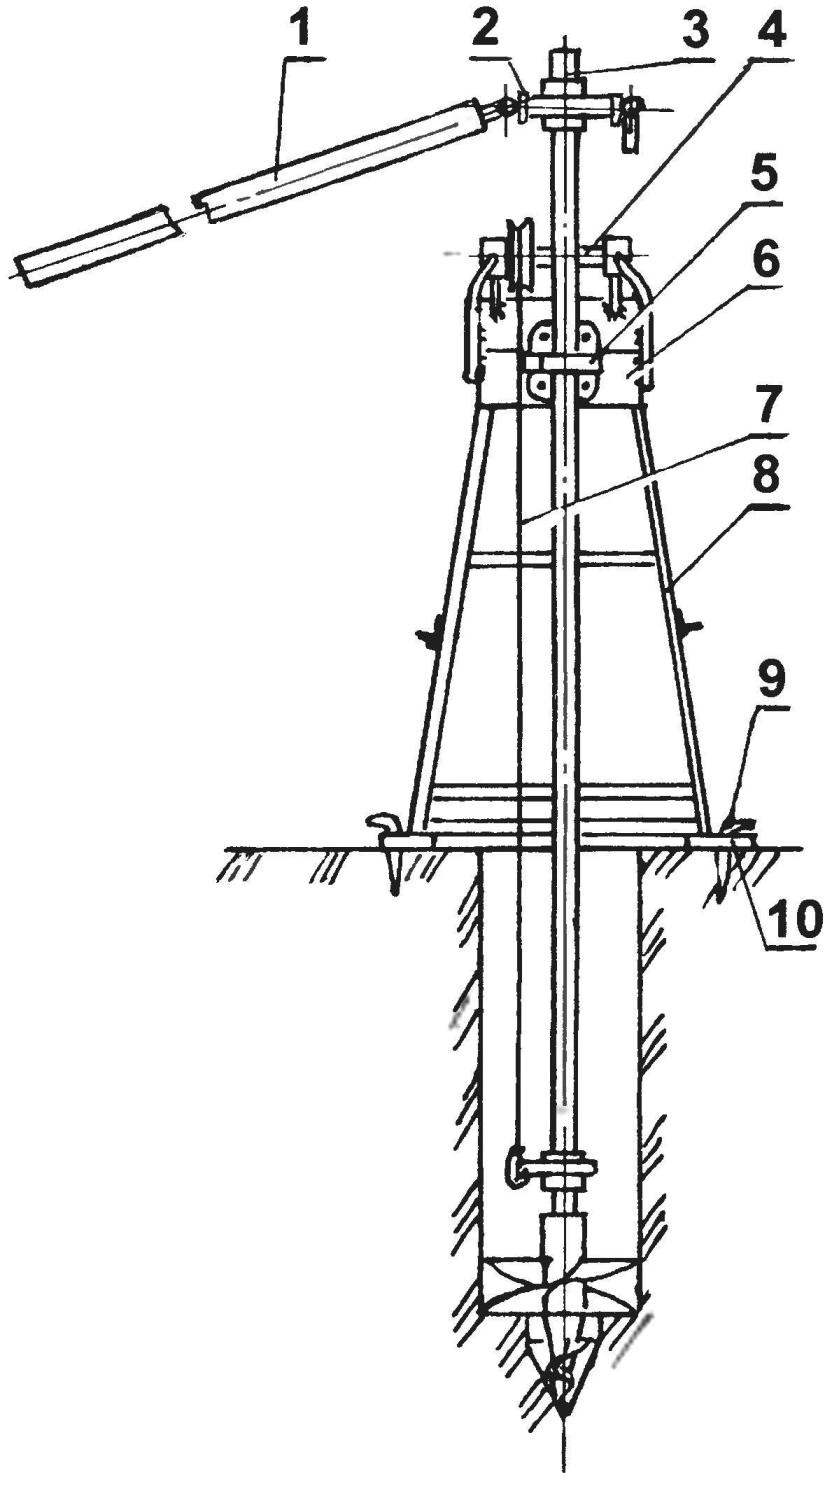 Fig. 1. Machine for drilling